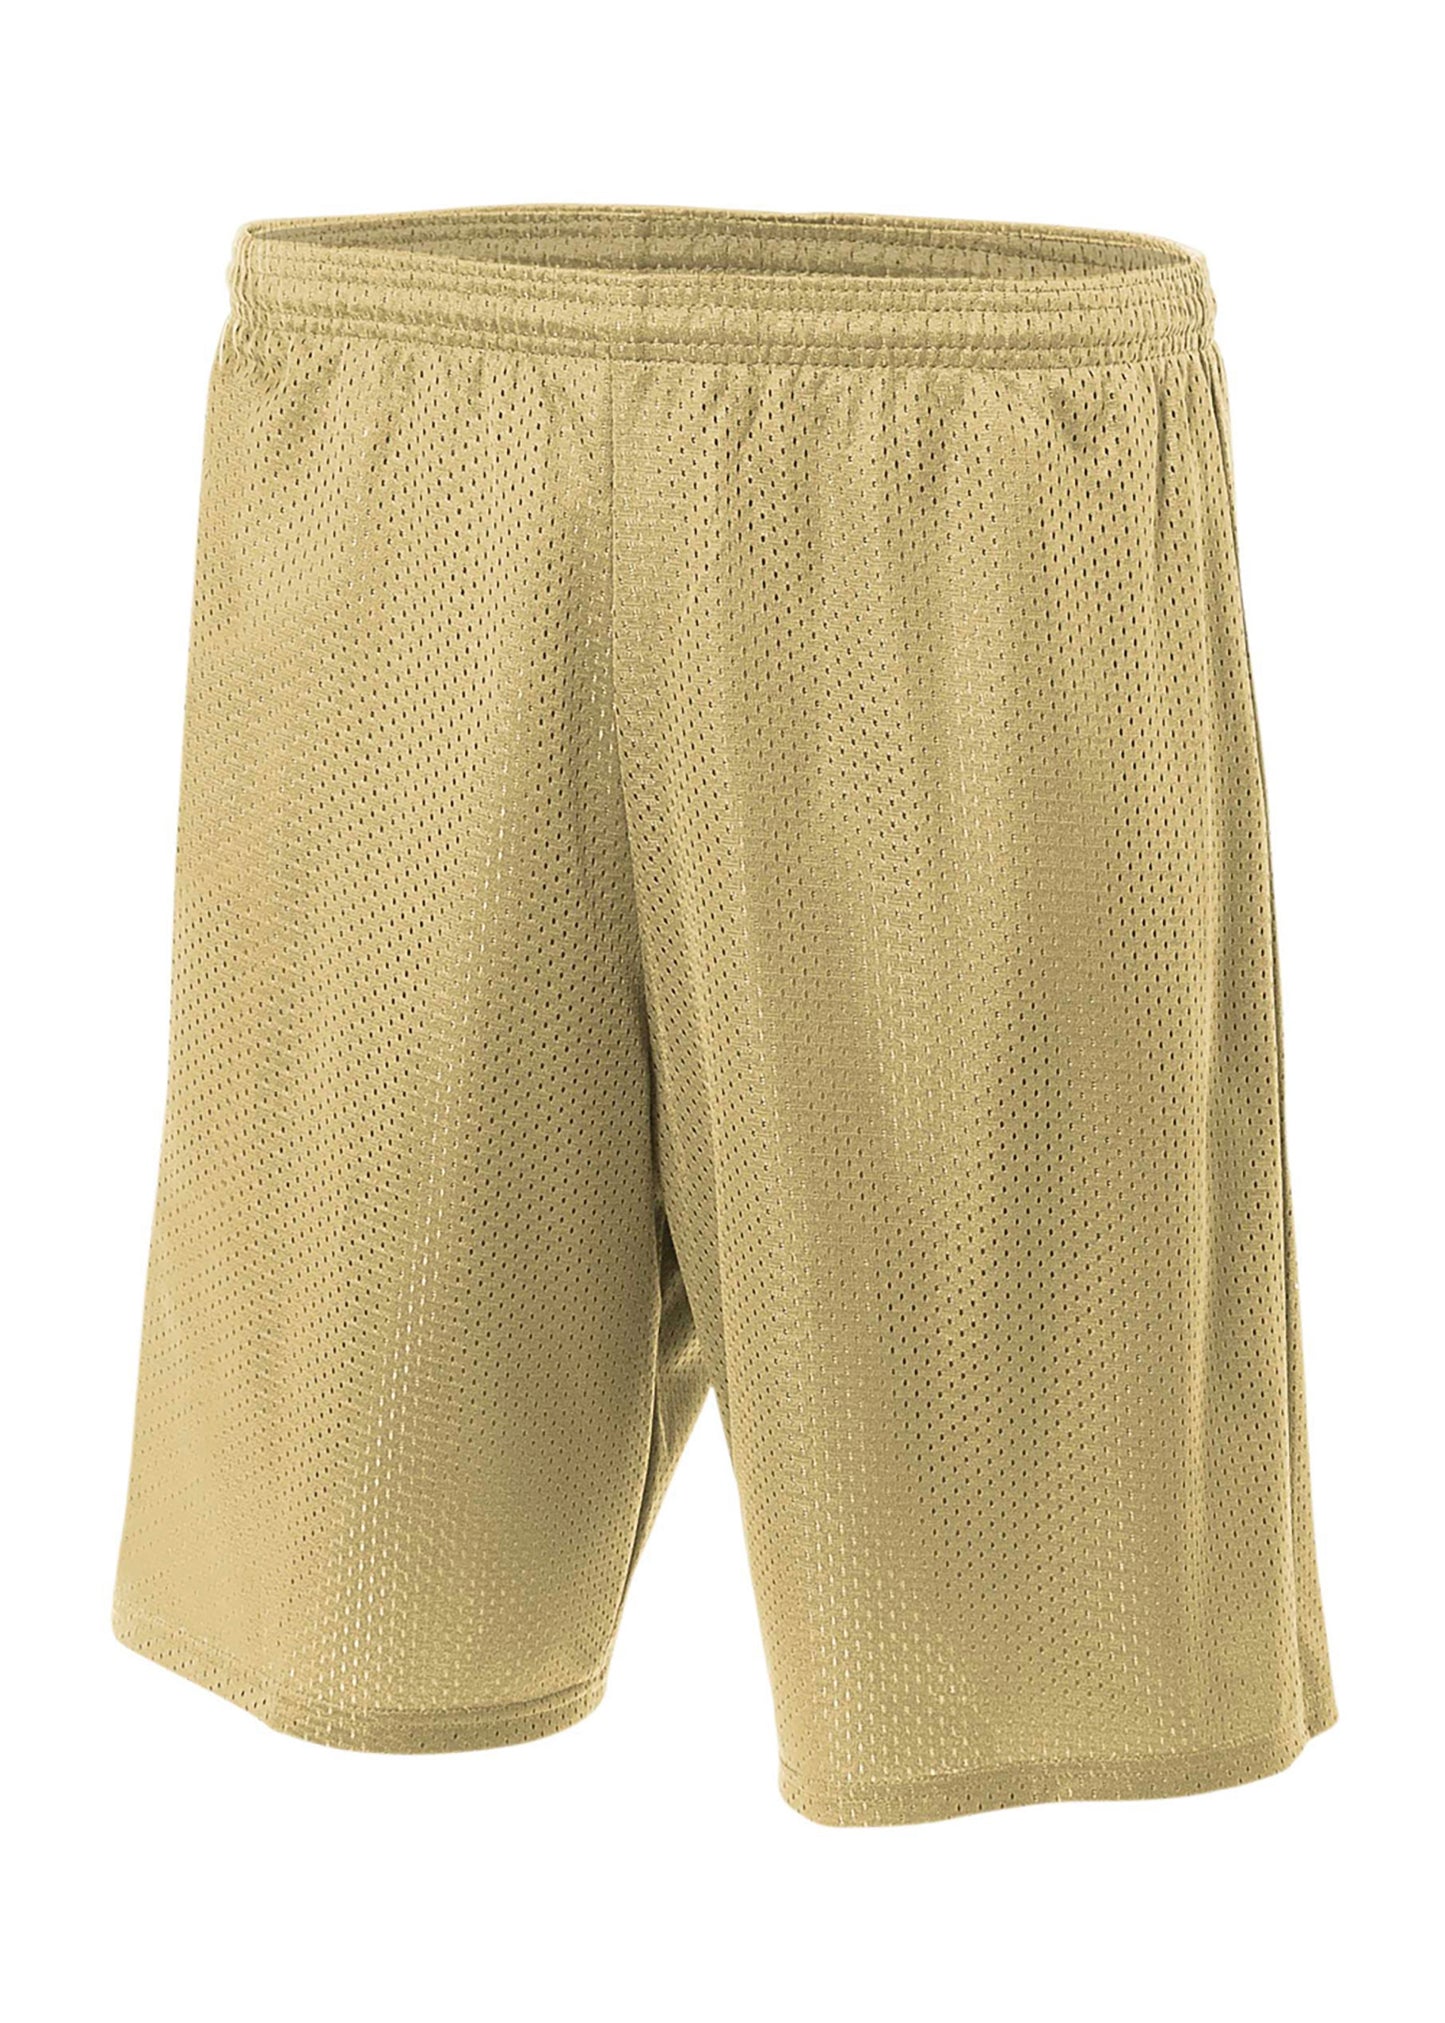 Photo of A4 SHORTS N5293  color  VEGAS GOLD